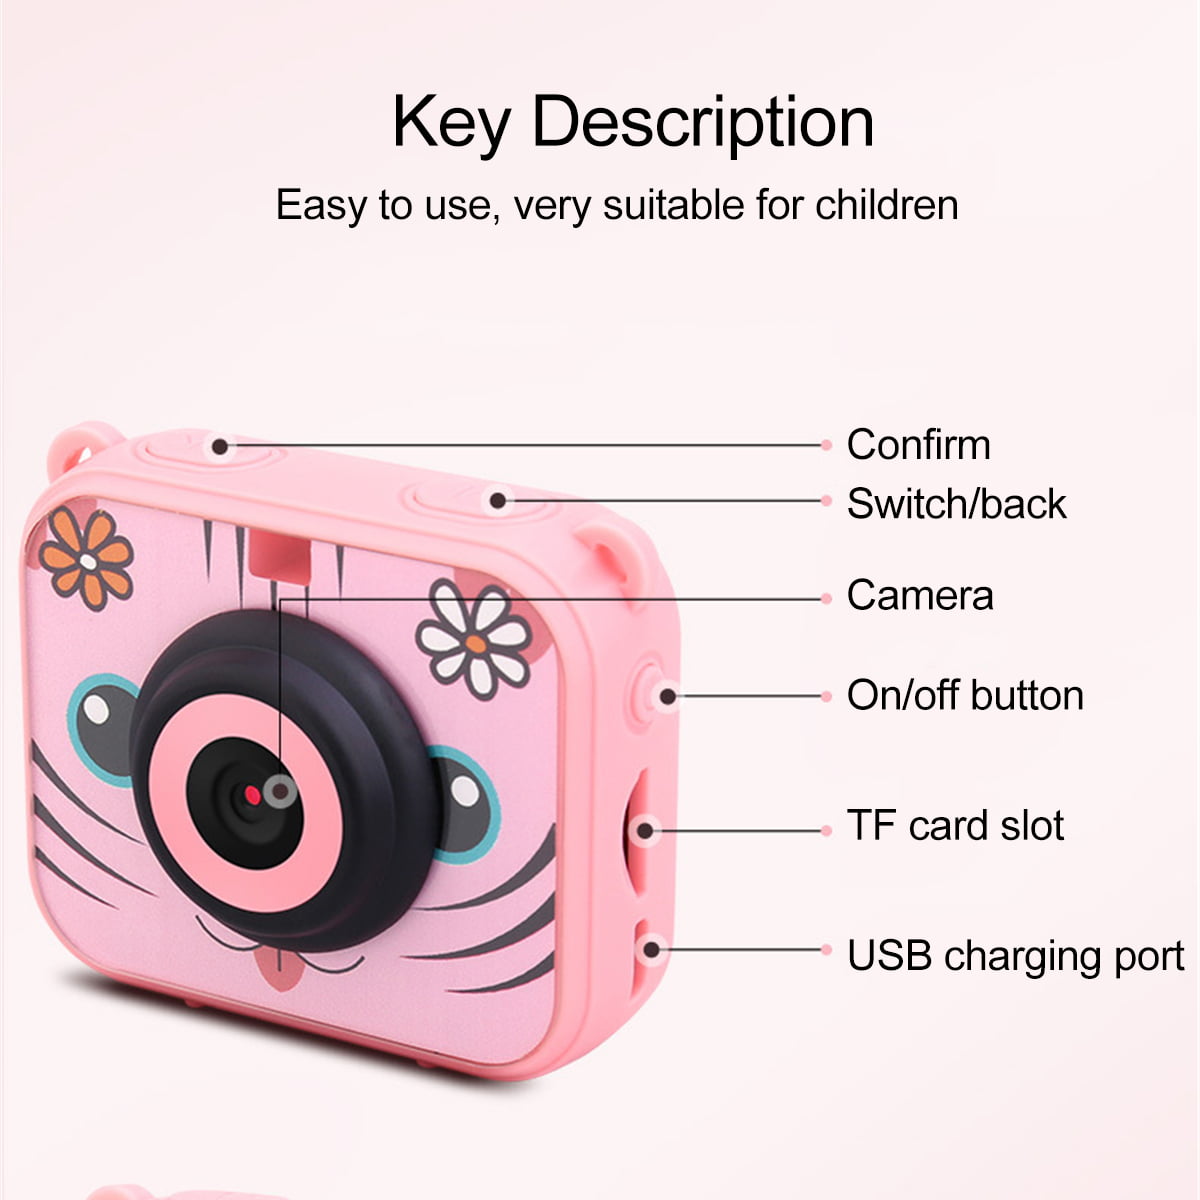 16G Micro SD Card 12MP HD Underwater Action Camera Camcorder with 8X Digital Zoom Easy to Use 2.0 Inch LCD Display Kids Waterproof Camera Digital Camera for 4-10 Years Old Children Orange 